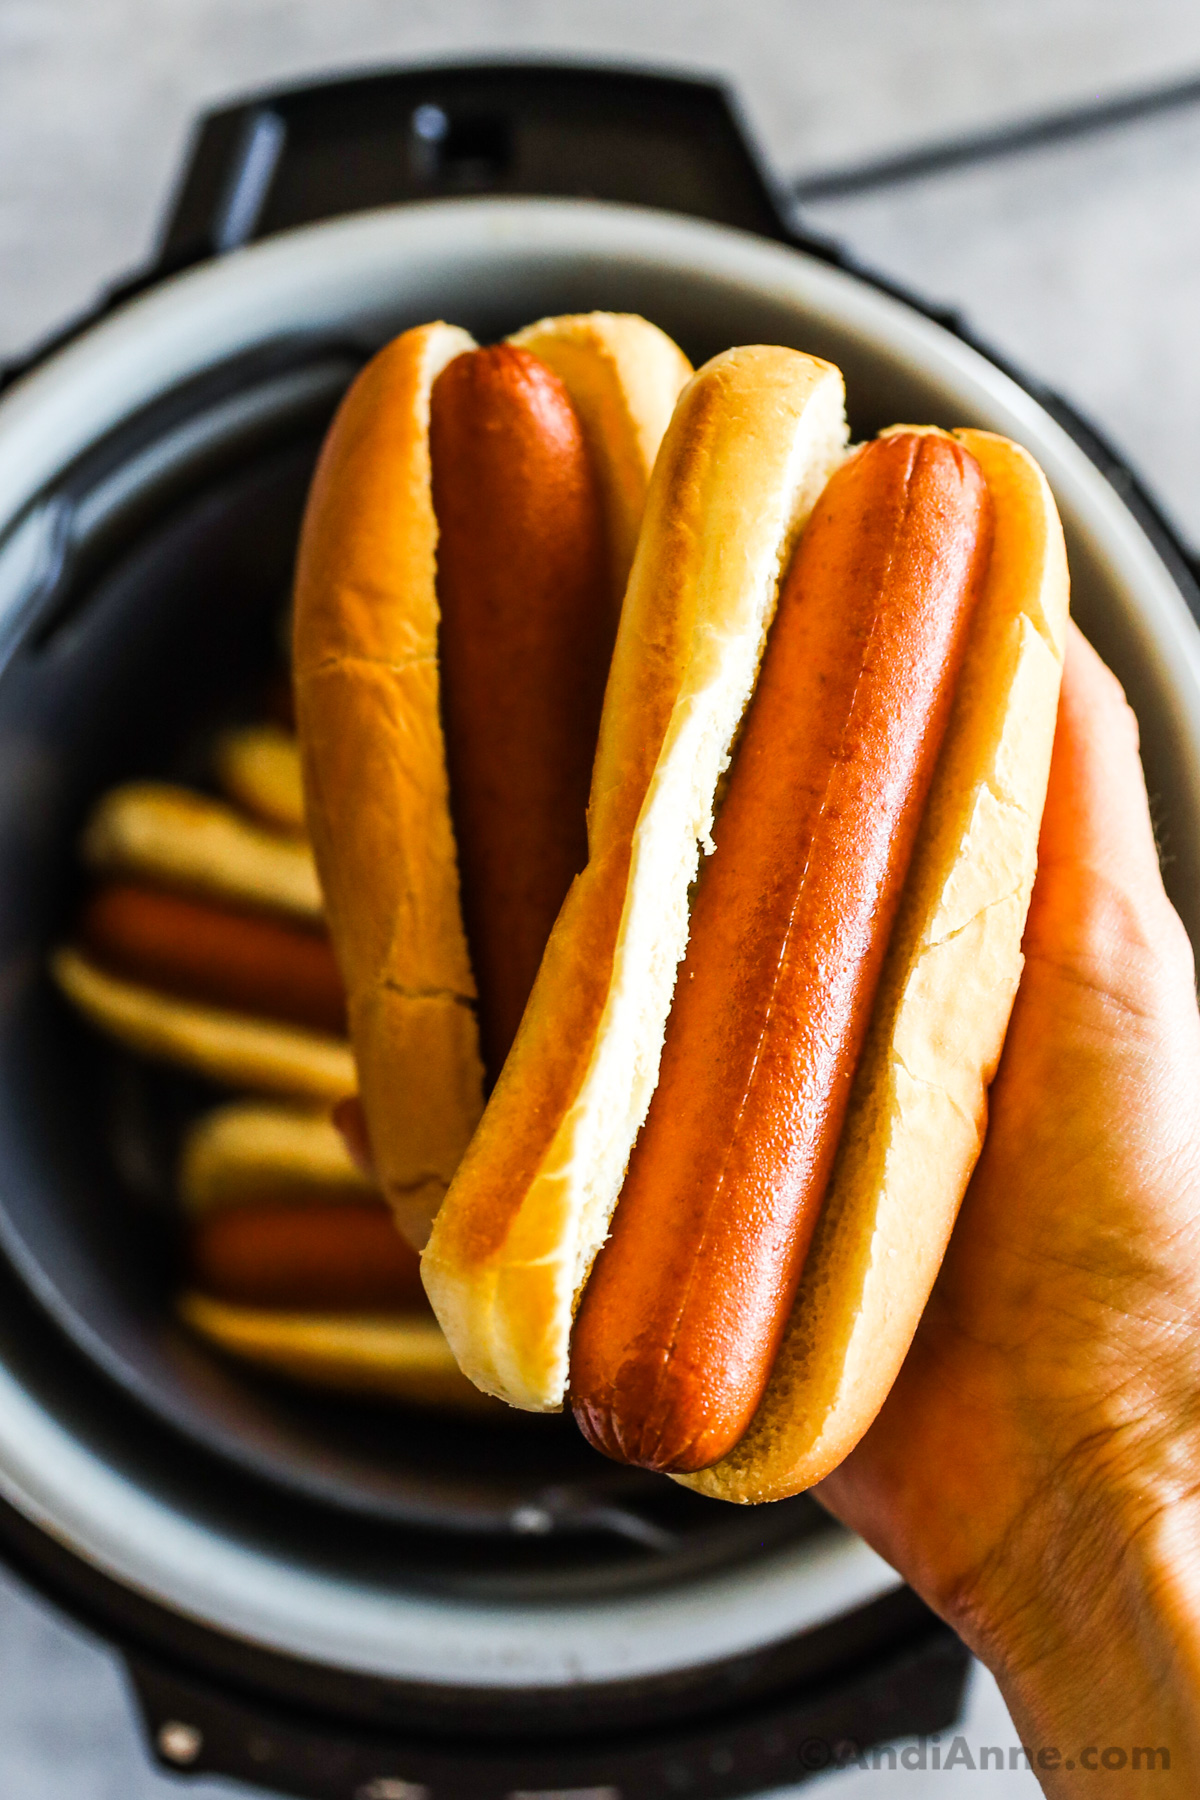 Hand holding two hot dogs above an air fryer.